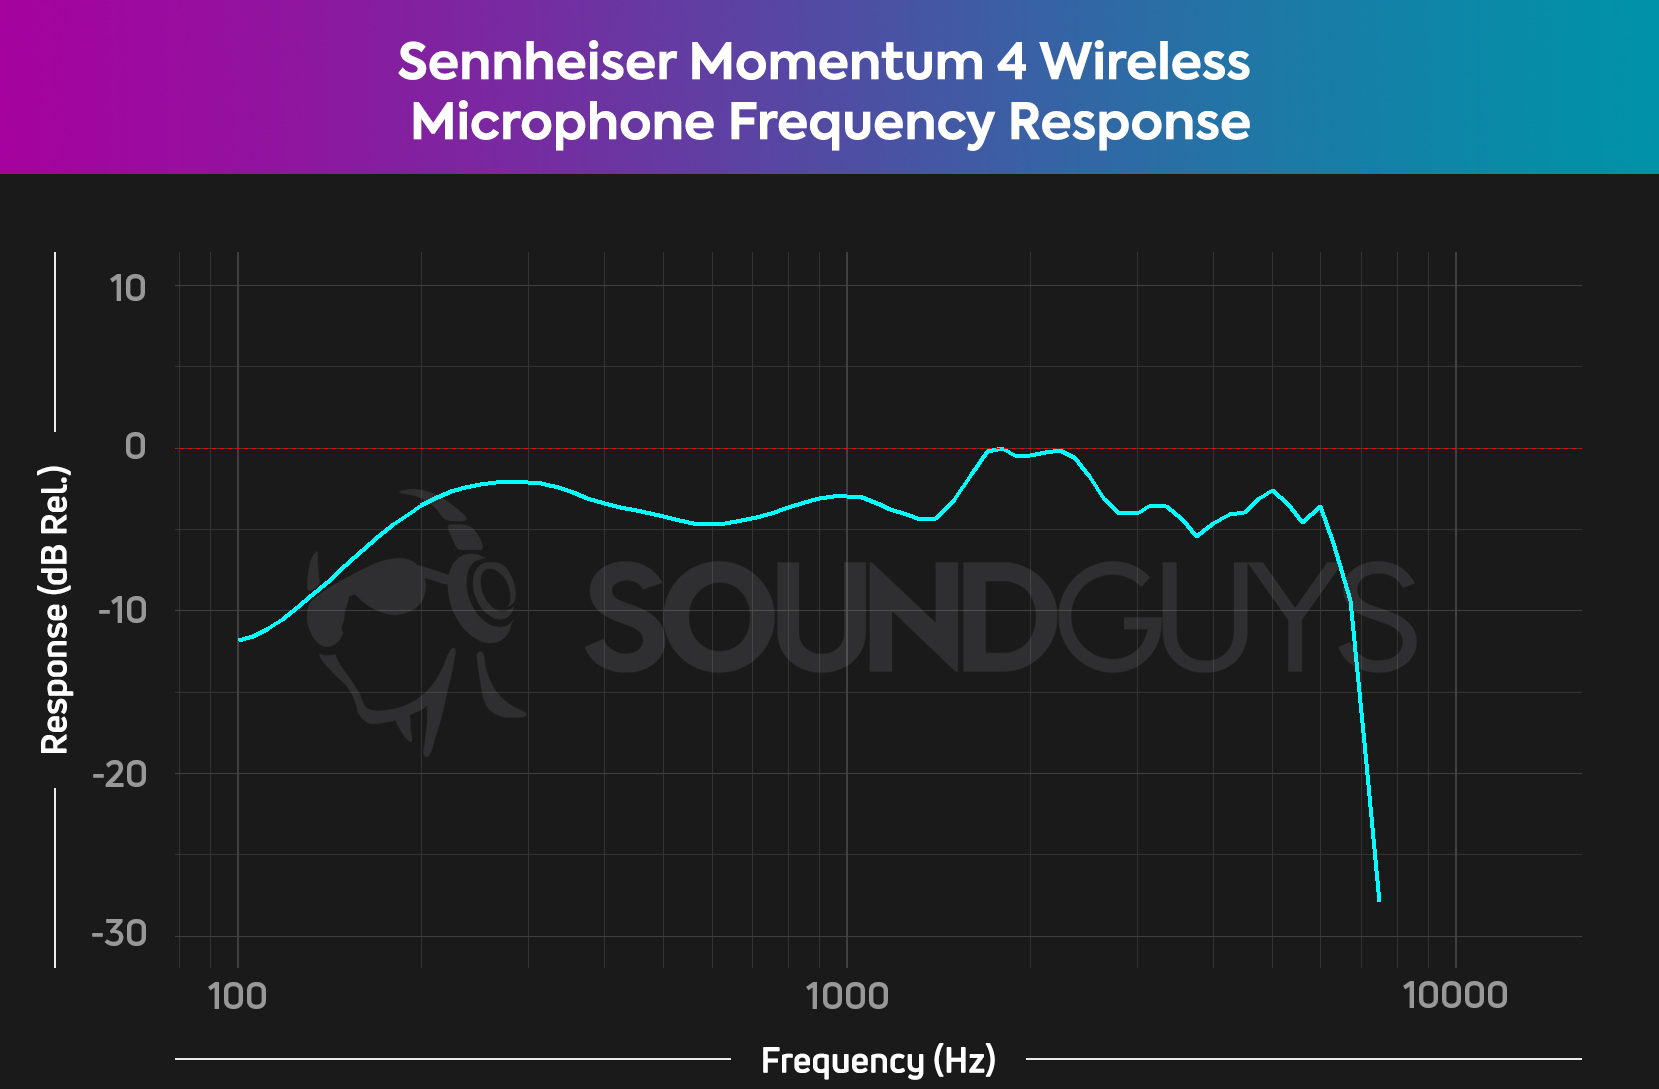 A chart showing the microphone frequency response of the Sennheiser Momentum 4 Wireless extending from 100 to 7kHz, where it falls off steeply.